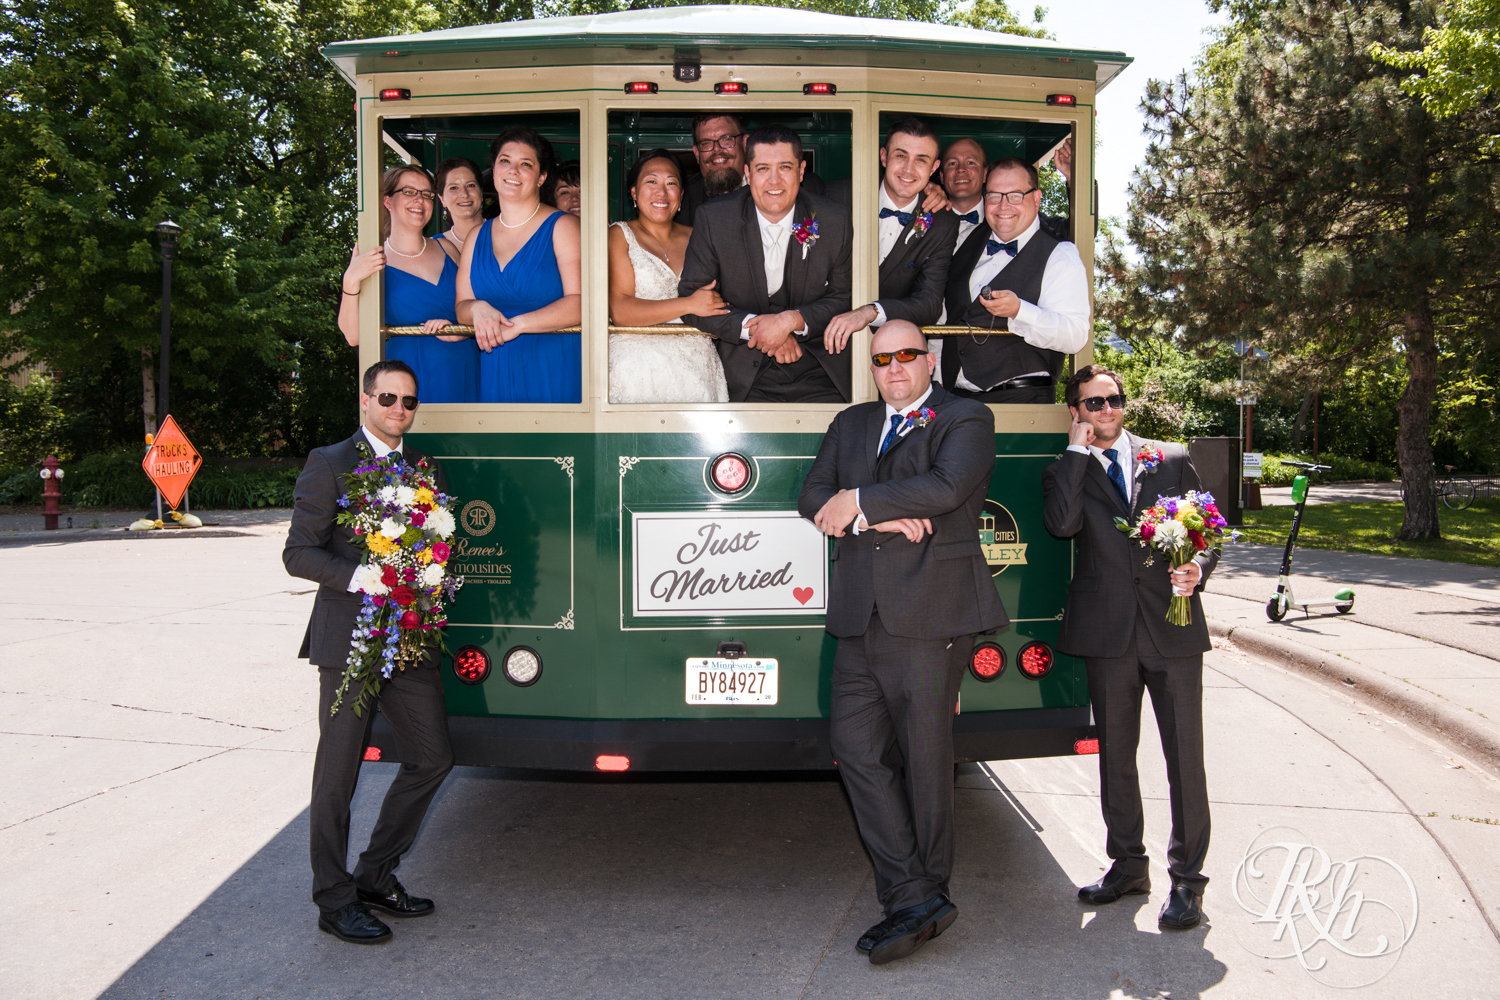 Wedding party smiles and laughs on trolley at the University of Minnesota in Minneapolis, Minnesota.